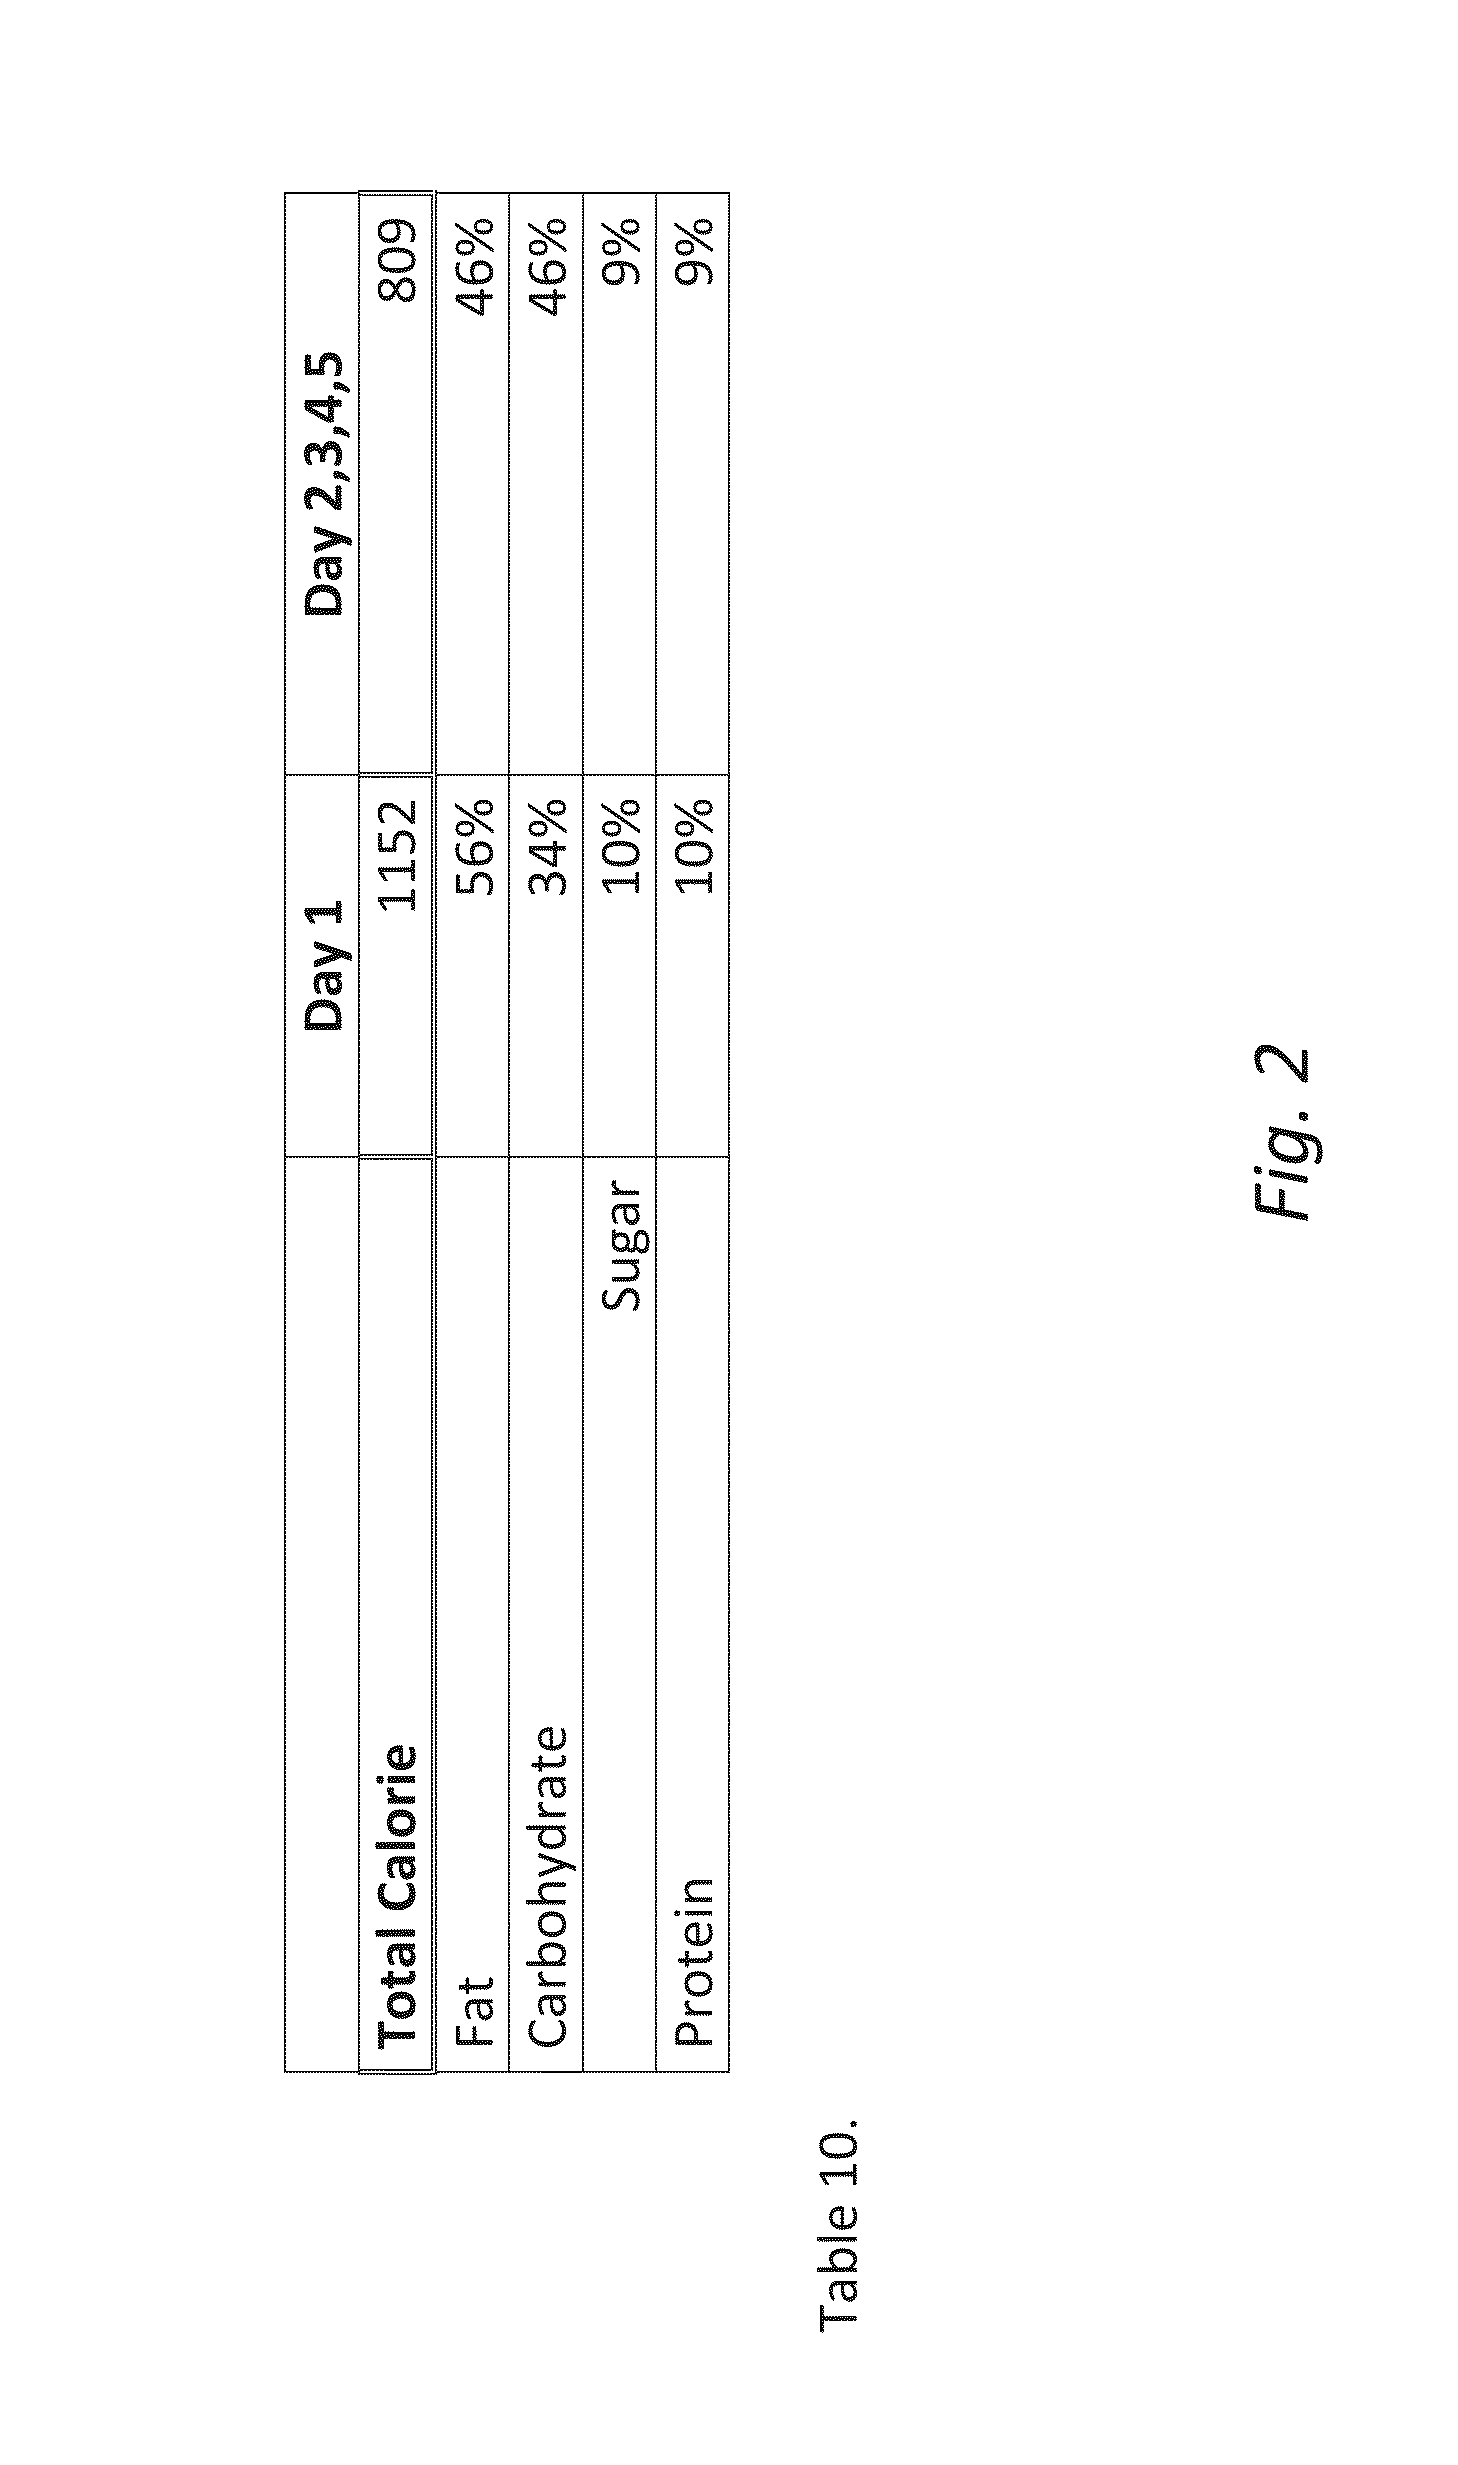 Methods and diets for lowering glucose and/or IGF-1 levels